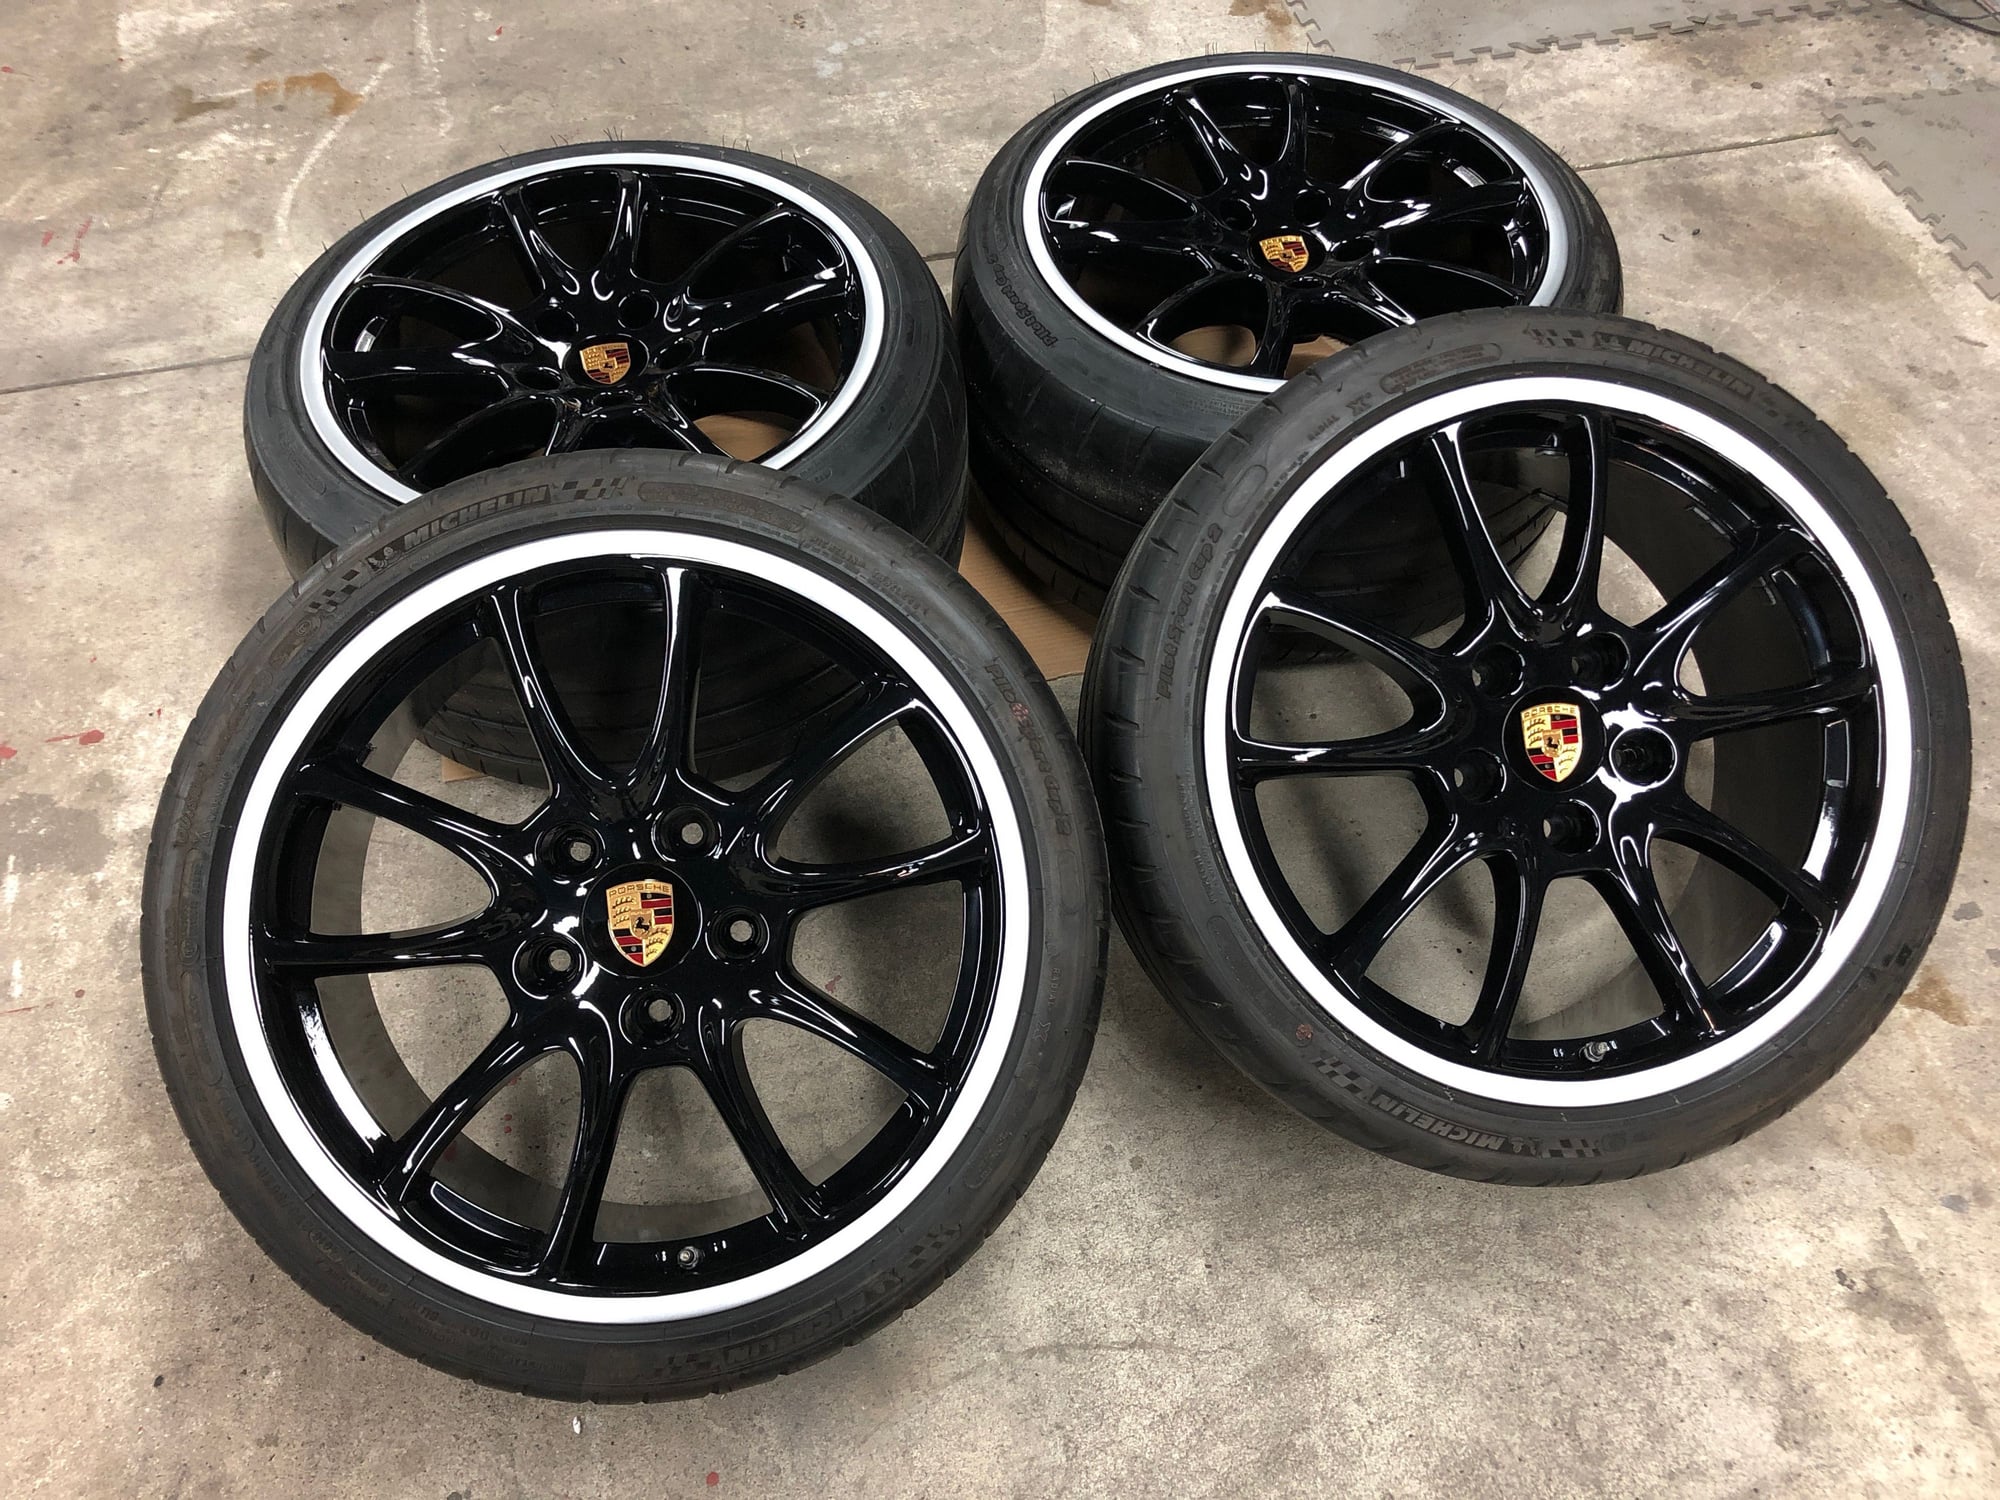 Wheels and Tires/Axles - OEM / Porsche GT3 wheels / Gloss Black 997.1 997.2 RS GT2 Michelin Pilot Sport Cup 2 - Used - 2001 to 2012 Porsche 911 - Lansdale, PA 19446, United States